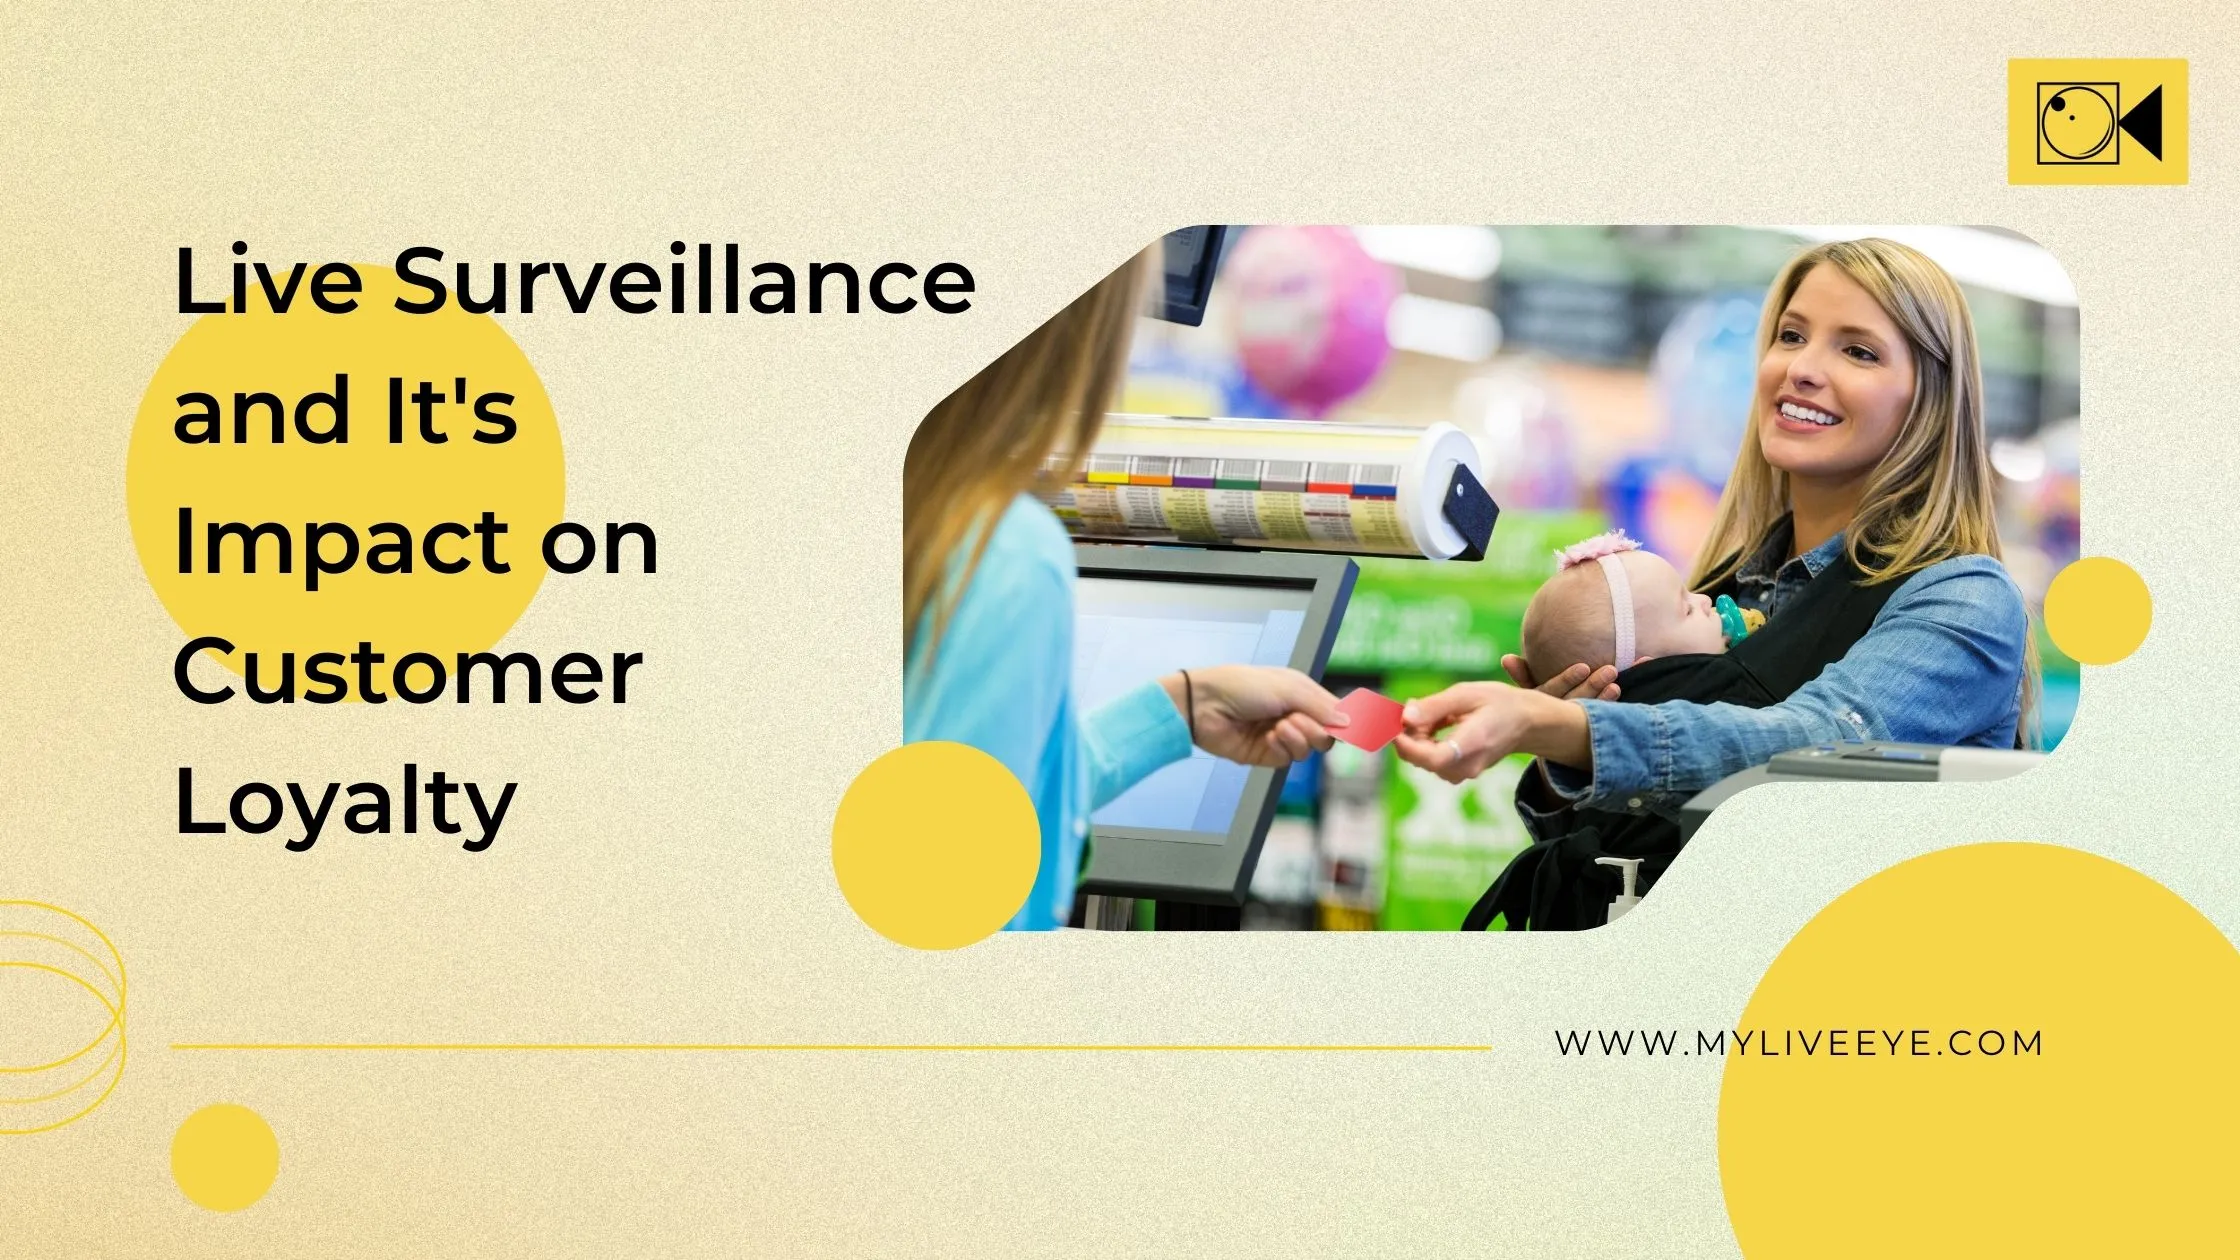 Live Surveillance and It's Impact on Customer Loyalty